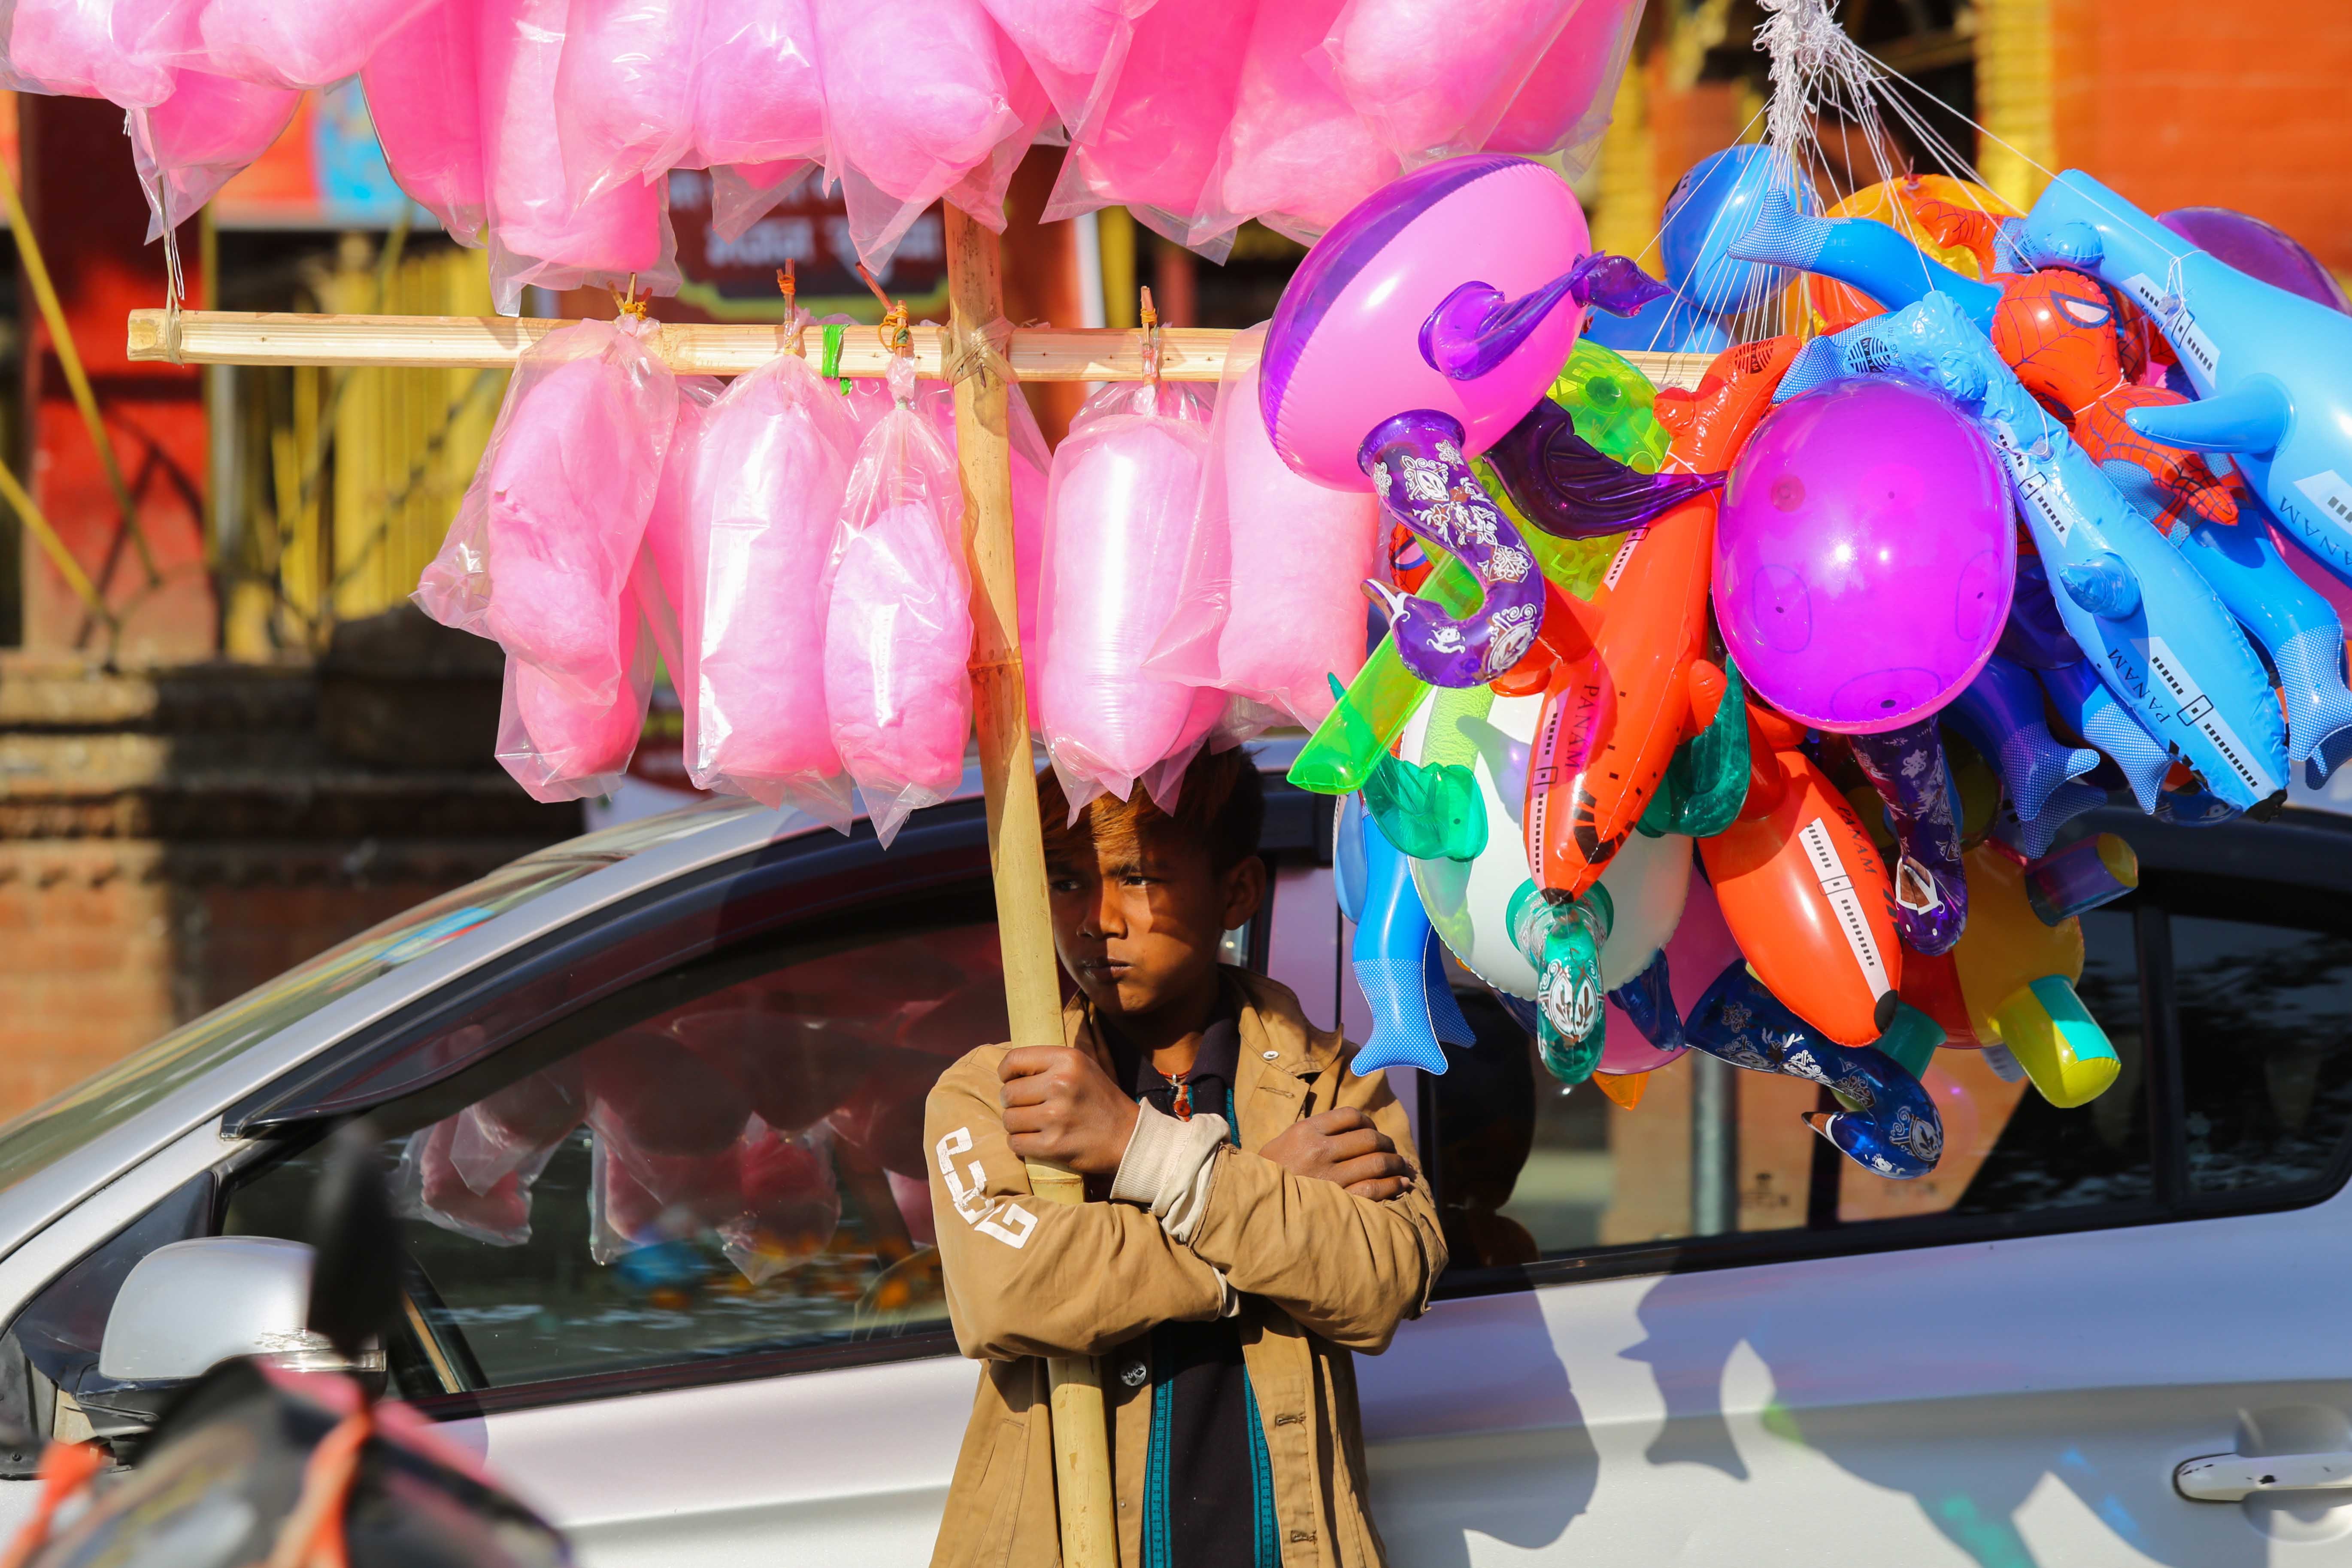 A child awaits customers to sell cotton candy and balloons in Kathmandu, Nepal.